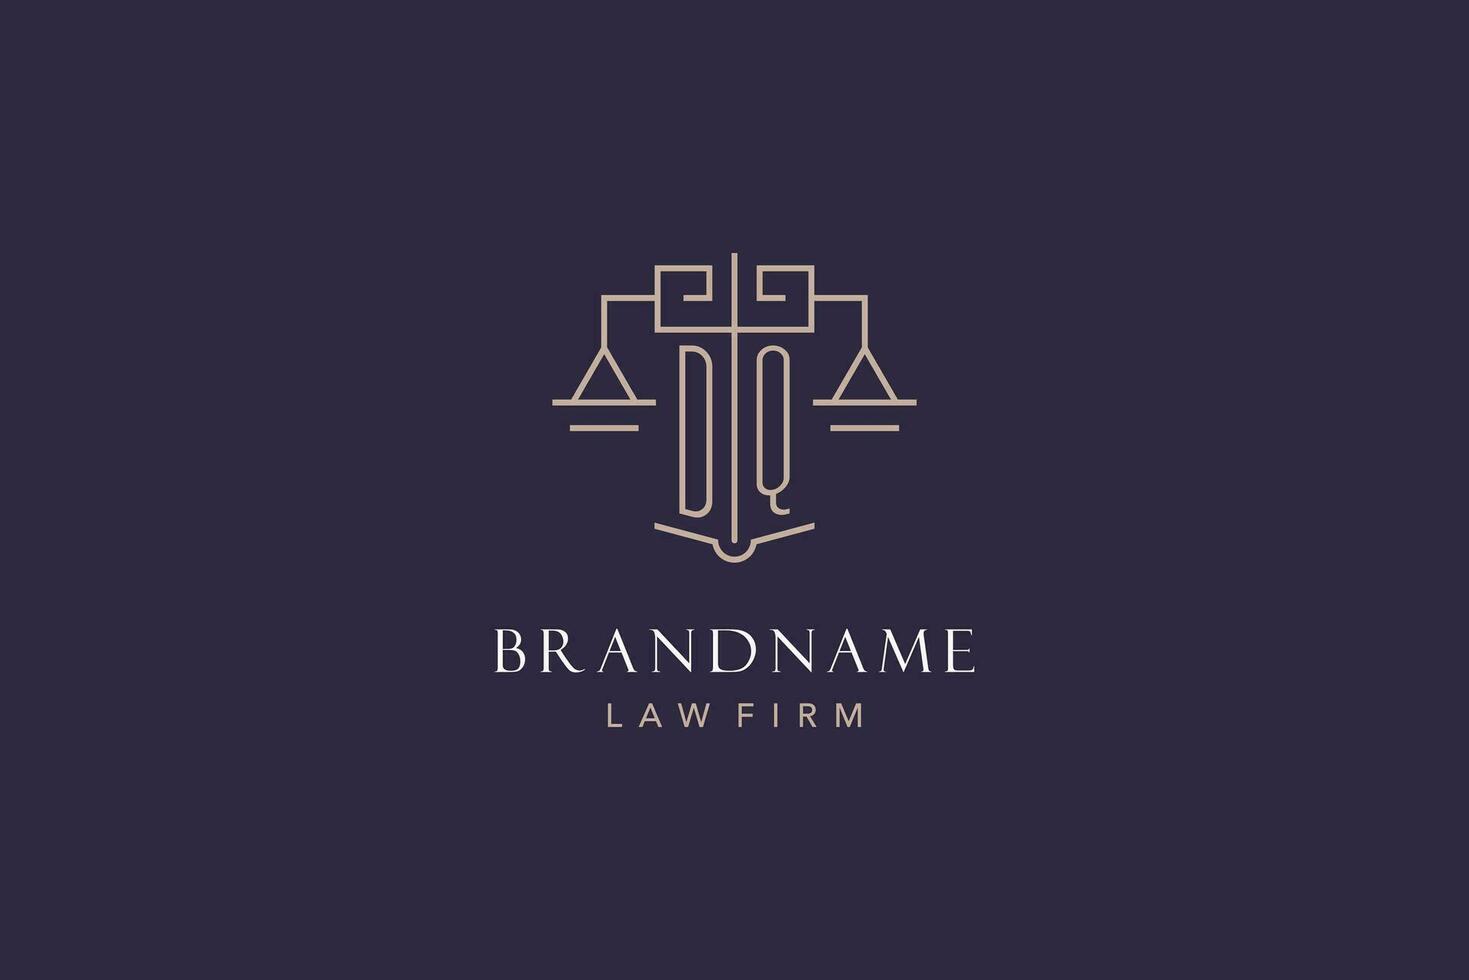 Initial letter DQ logo with scale of justice logo design, luxury legal logo geometric style vector